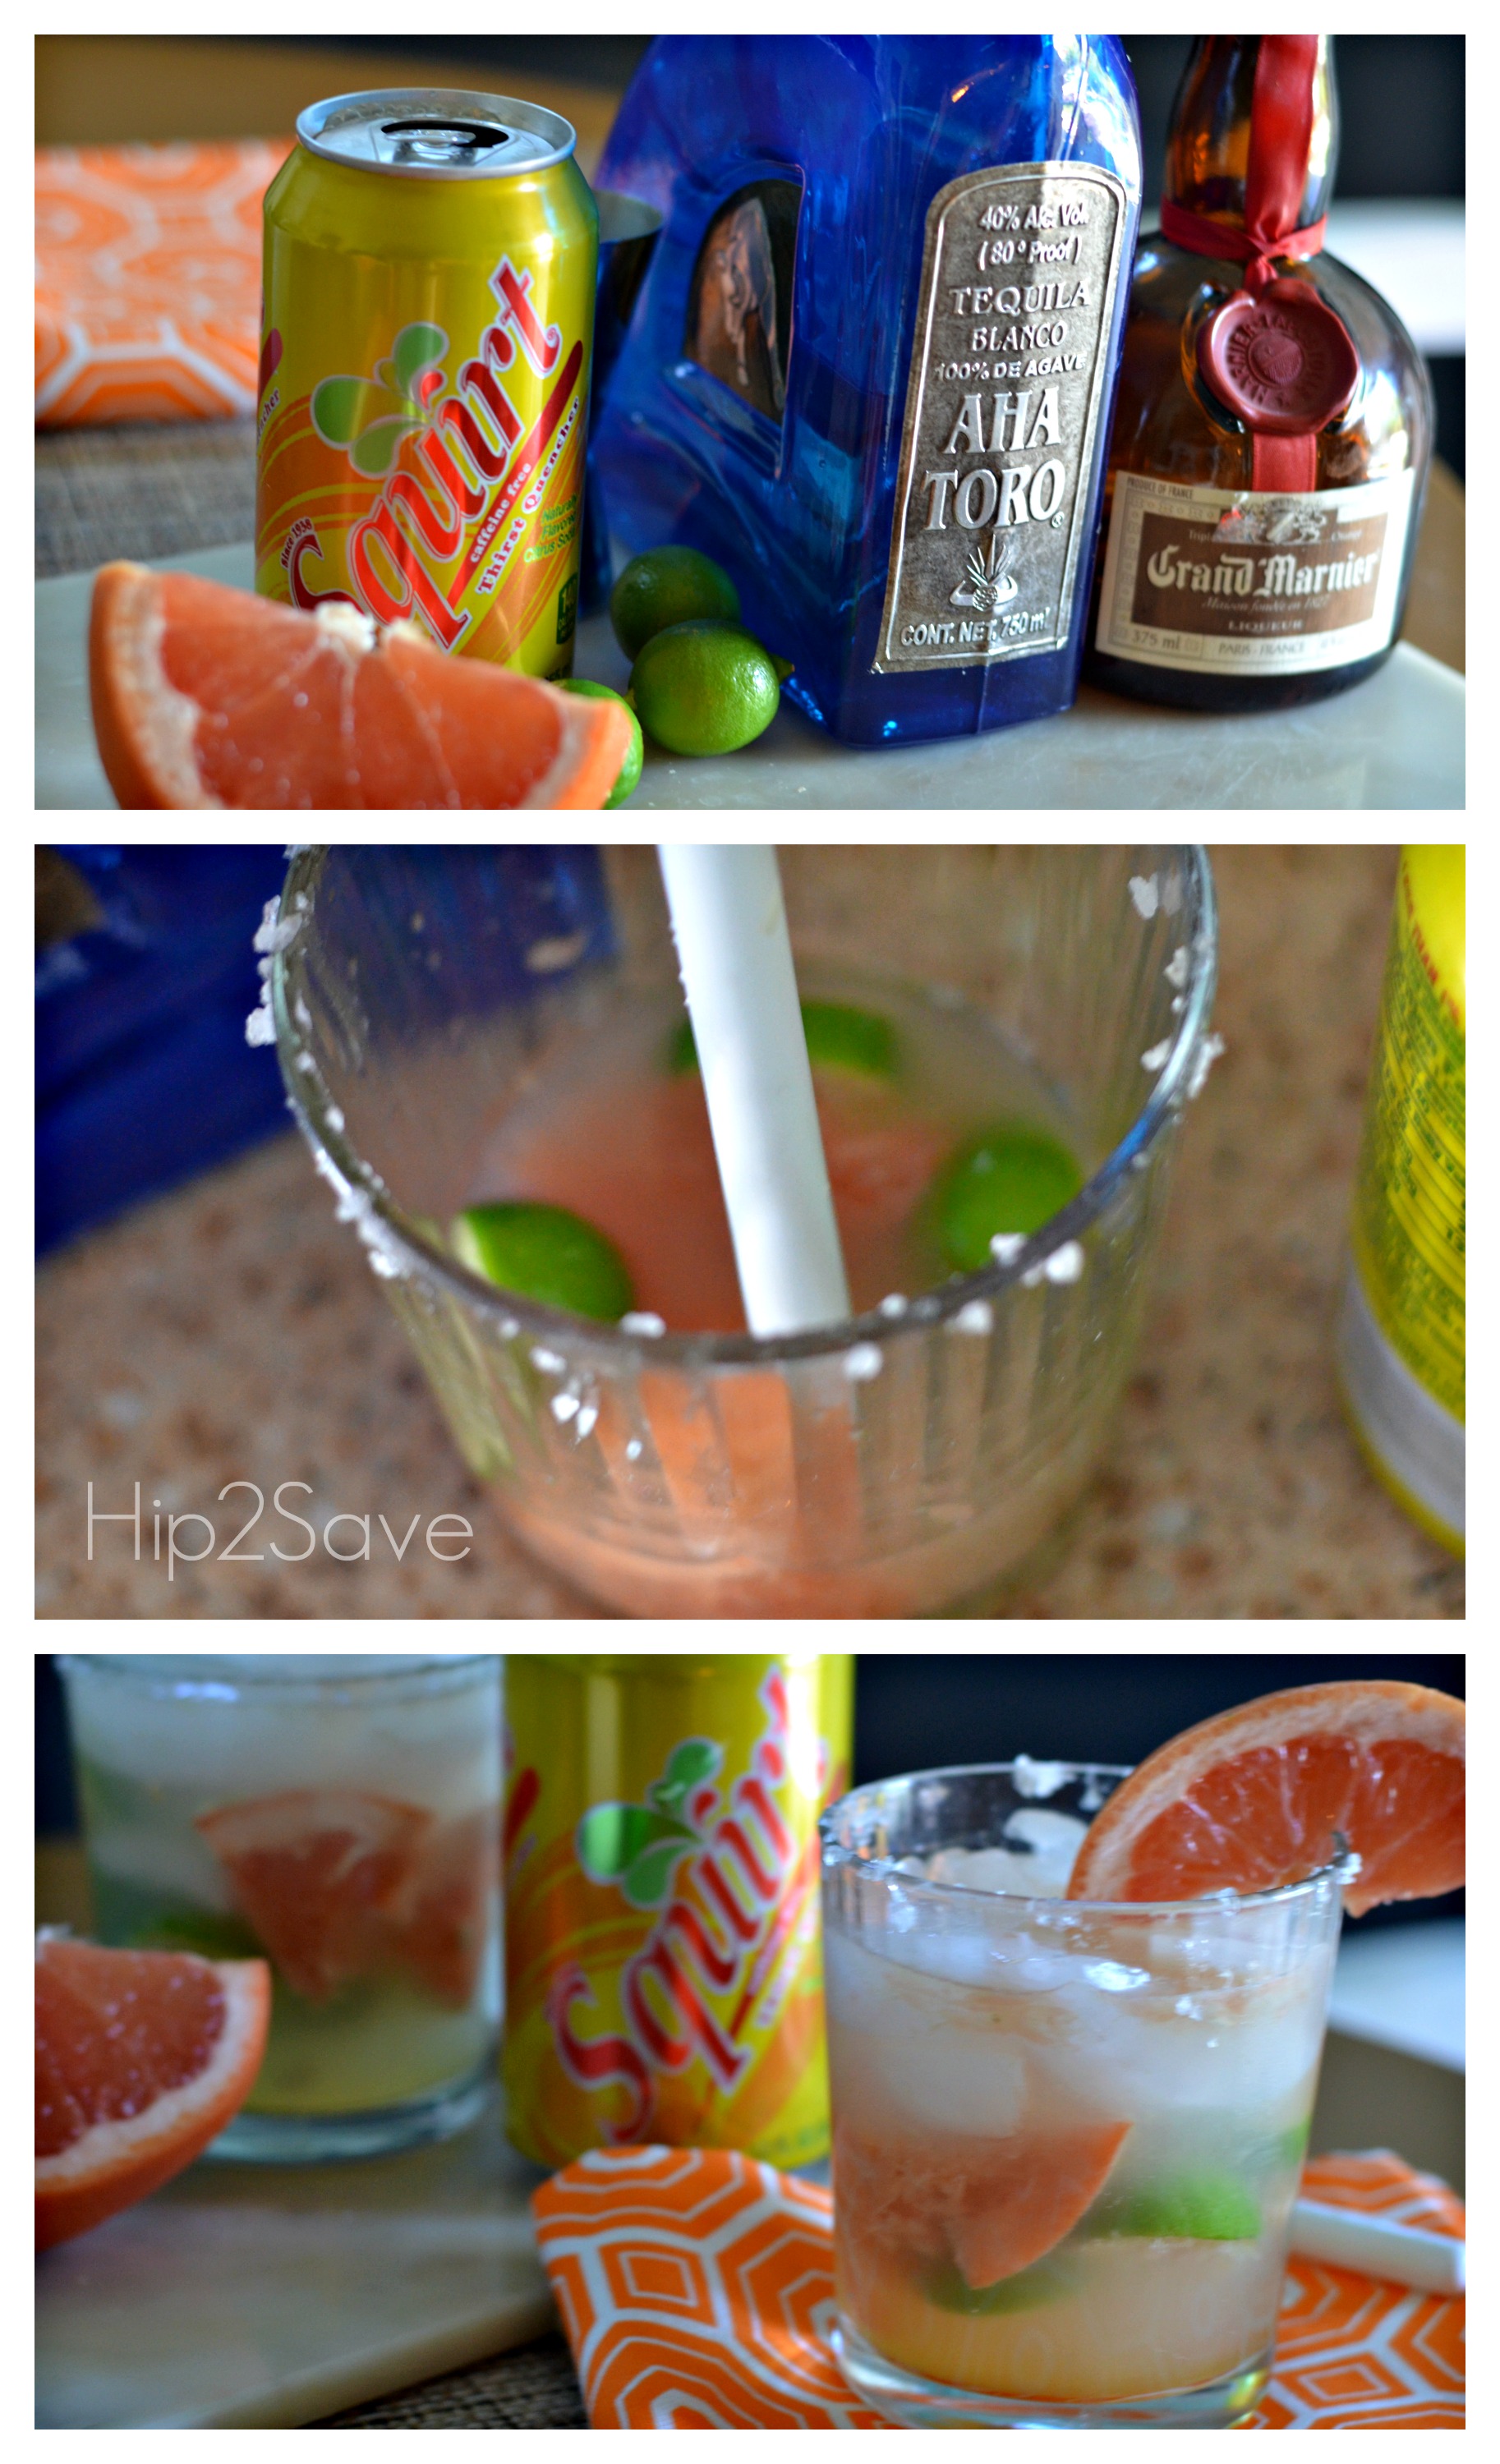 https://hip2save.com/wp-content/uploads/2014/07/how-to-make-a-paloma-cocktail-hip2save.jpg?strip=all